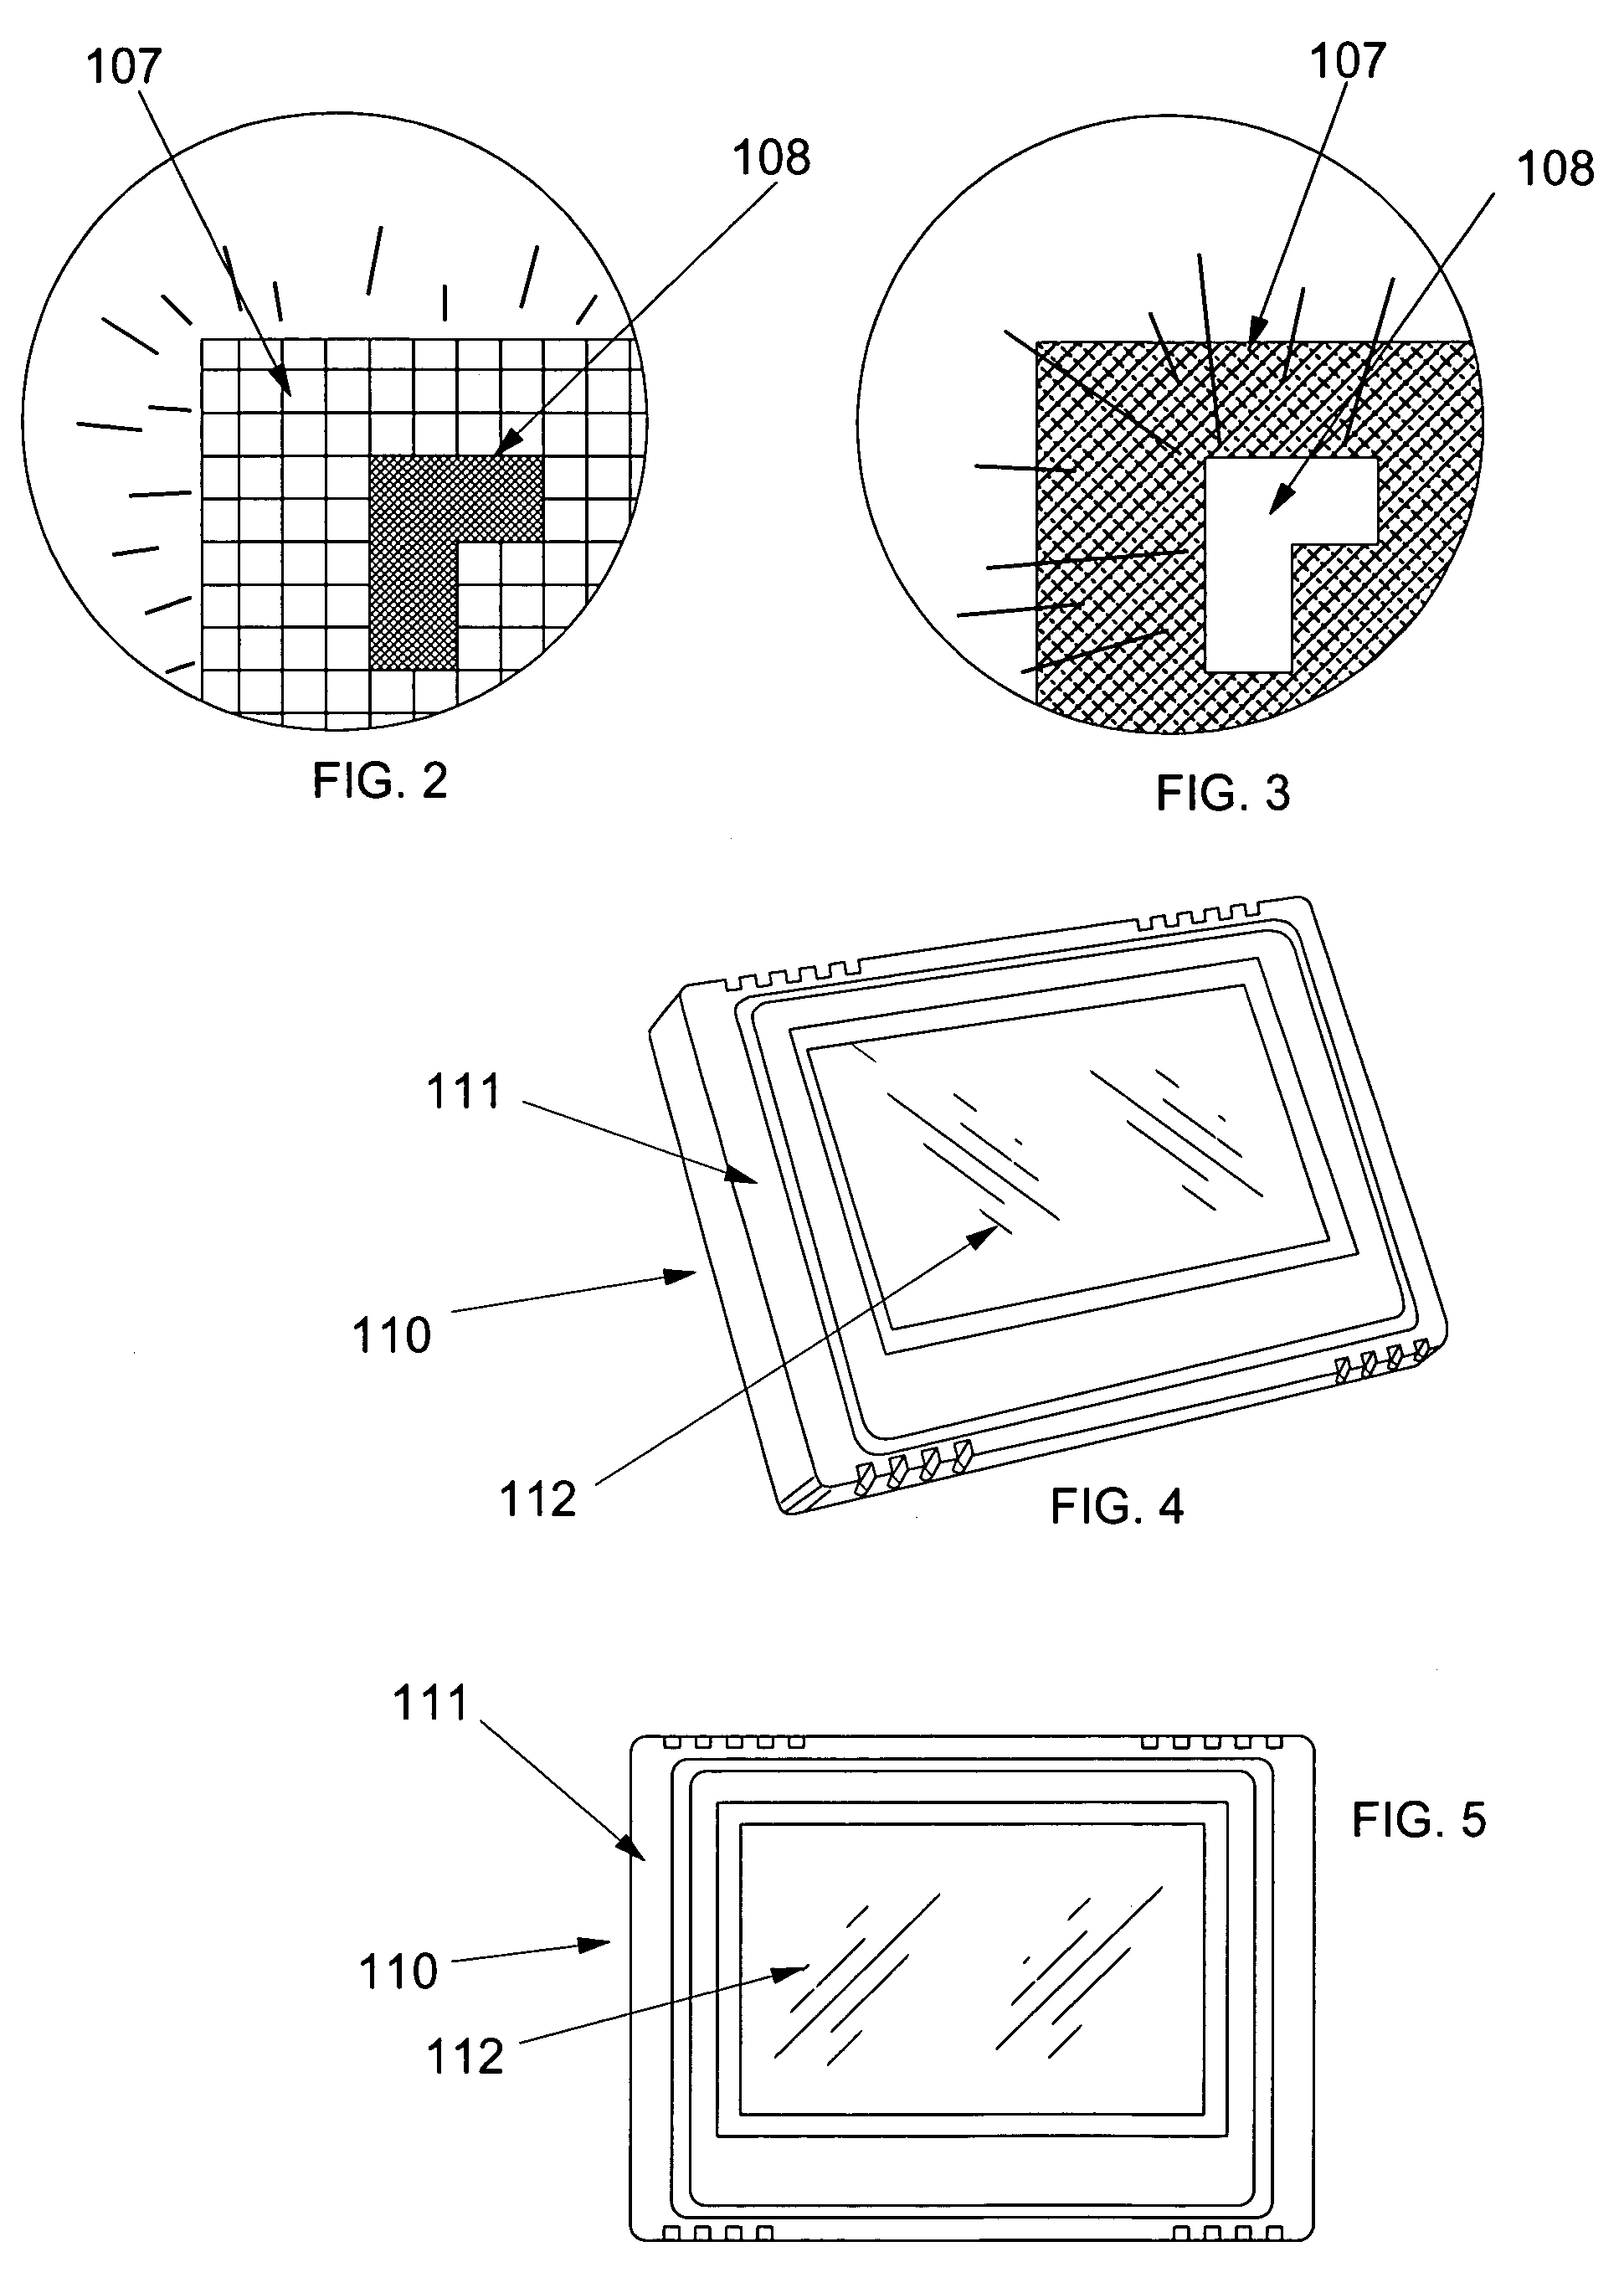 Programmable thermostat incorporating a liquid crystal display and having a feature for mounting horizontally, vertically and any intermediate orientation